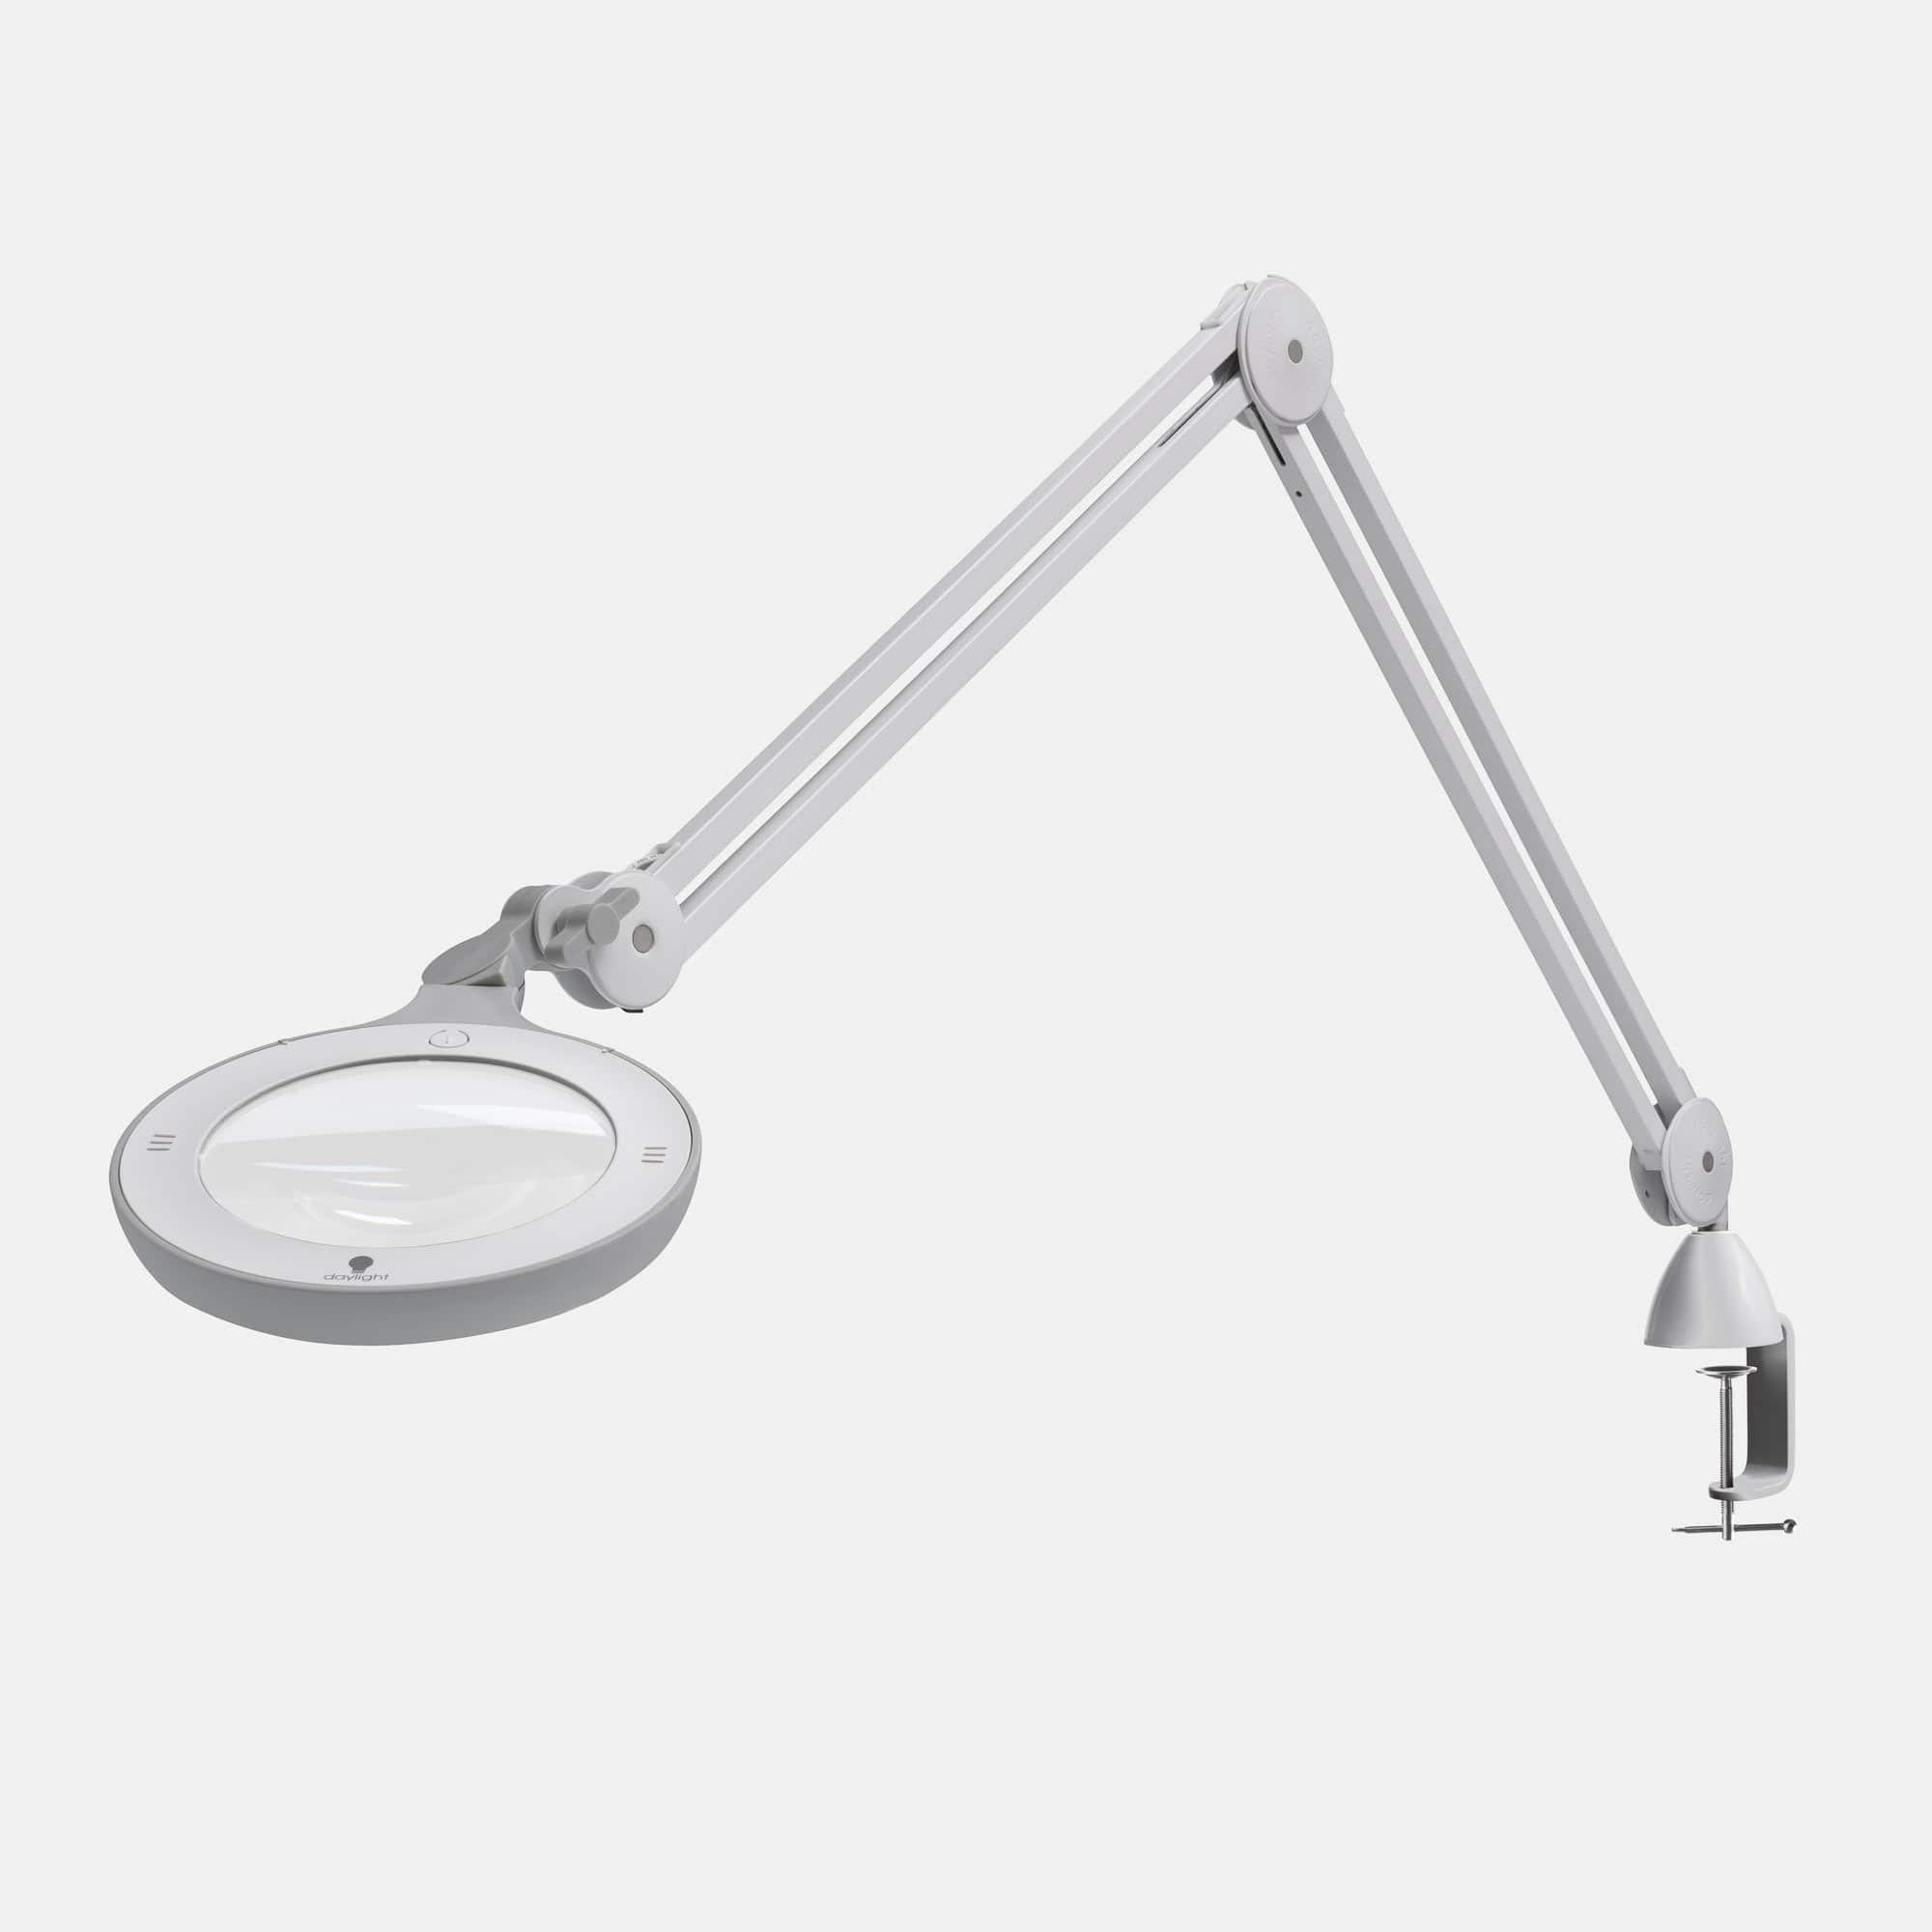 Daylight Light Floor Table Magnifying Magnifier Lamp Lamps Lights Craft  Lighting